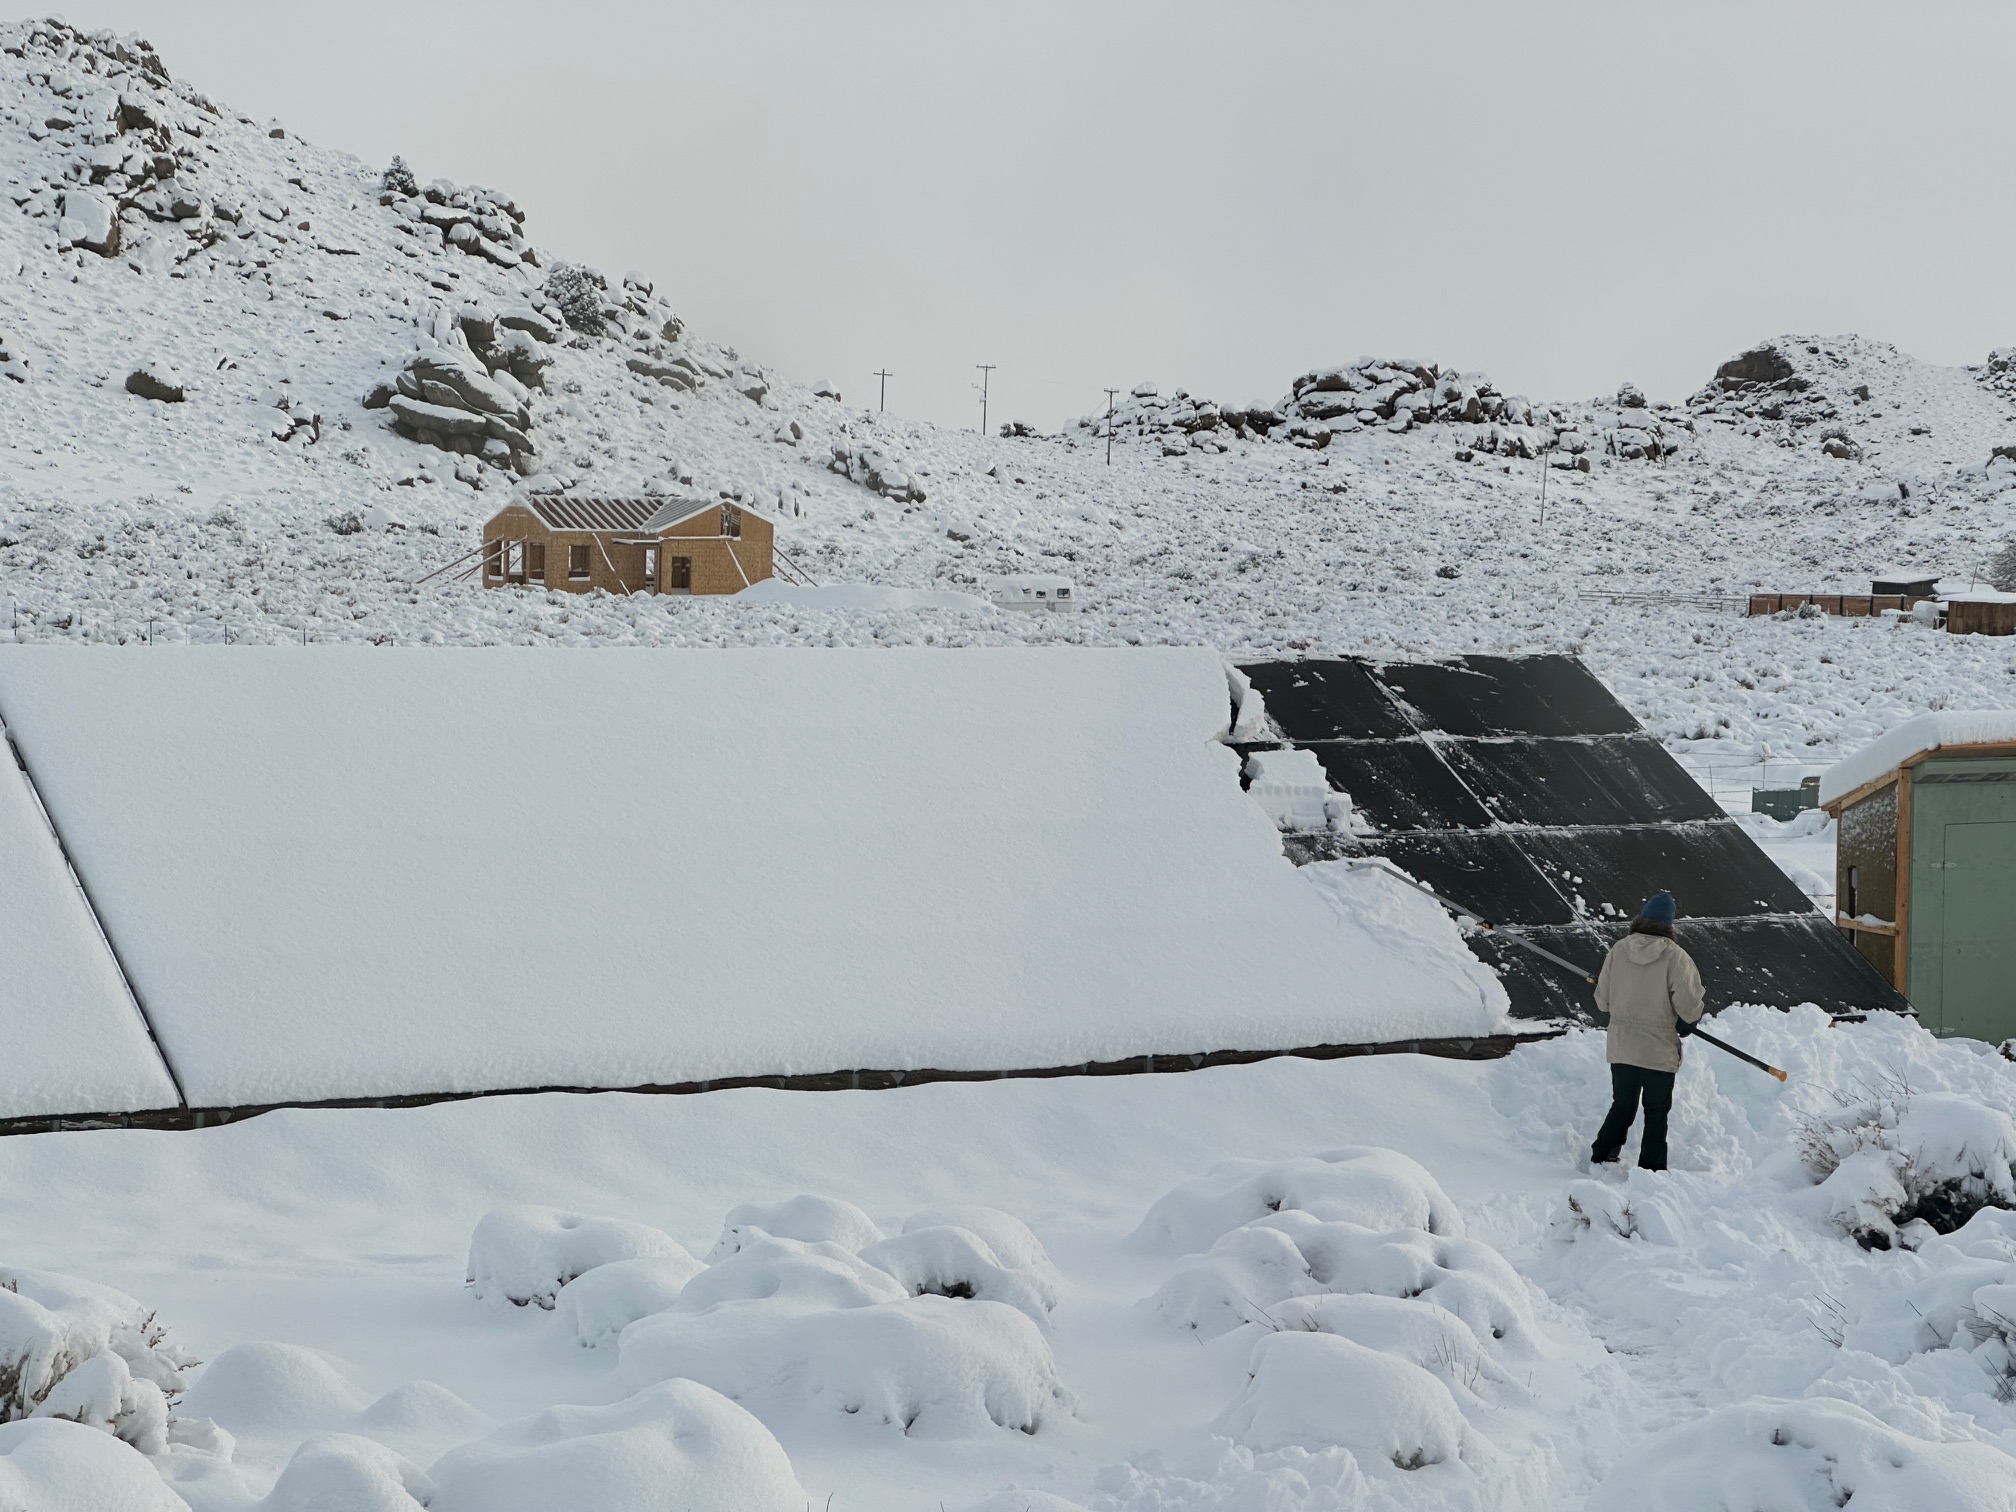 A woman uses a long snow rake to clear snow from solar panels